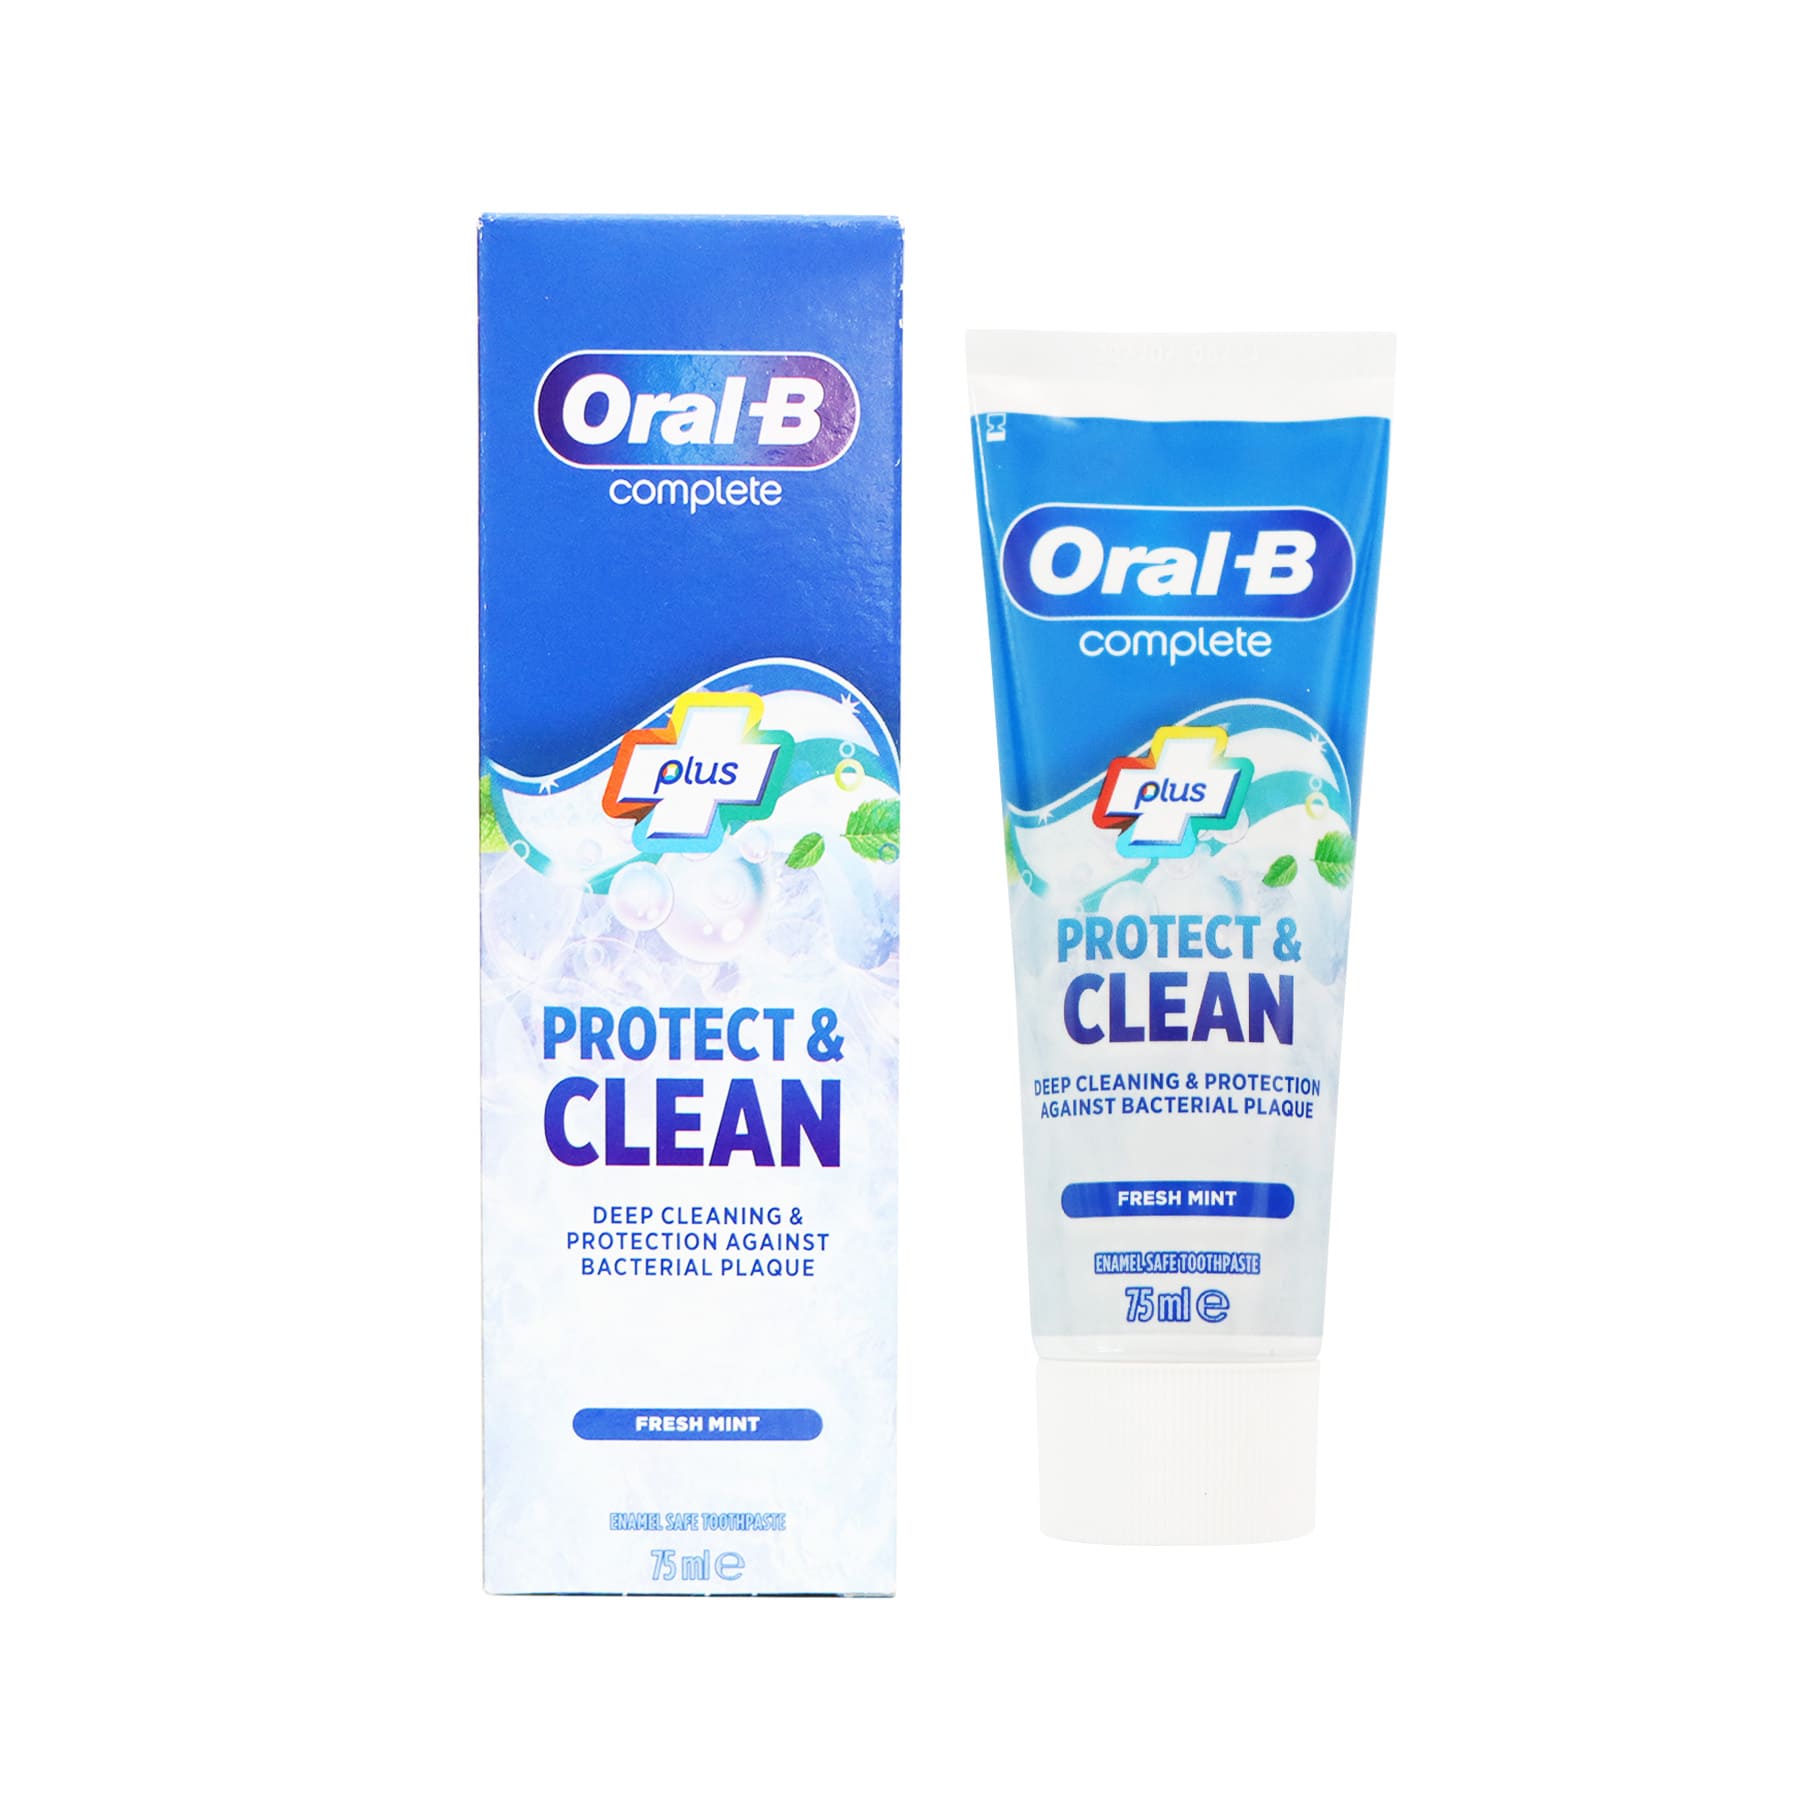 Oral-B Complete Plus Protect & Clean Toothpaste 75ml